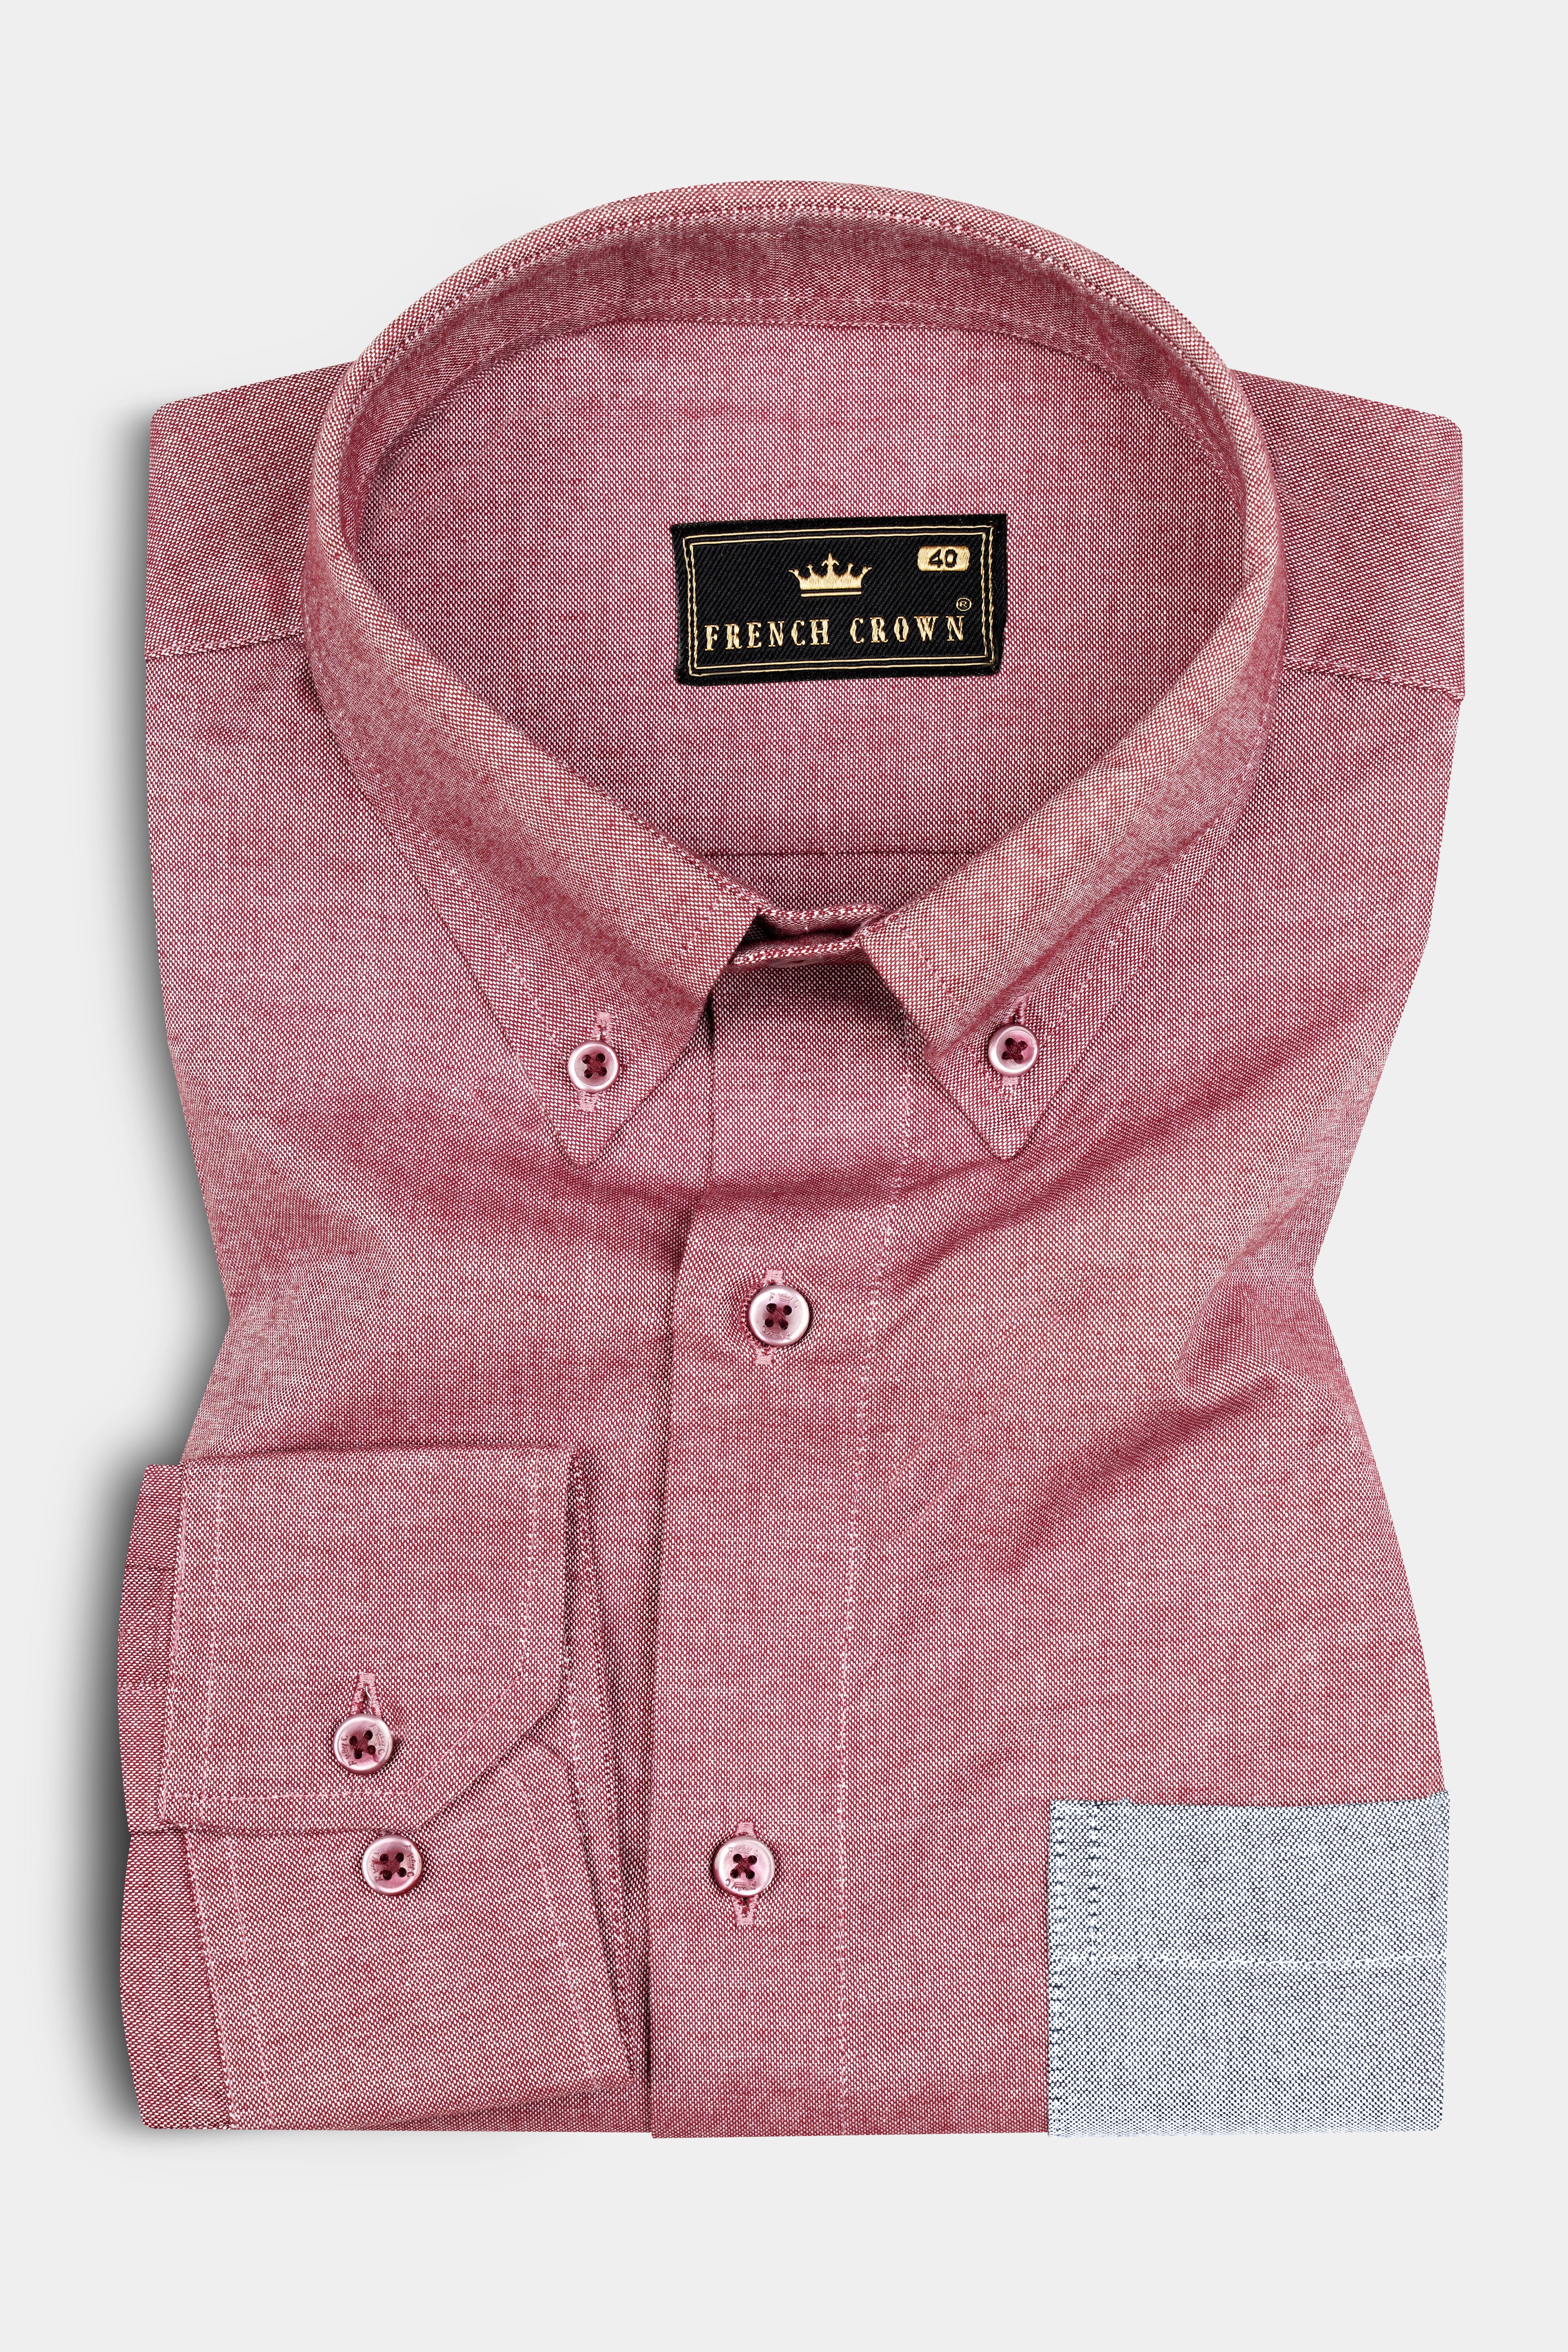 Contessa Red with Grey Pocket Solid Royal Oxford Shirt